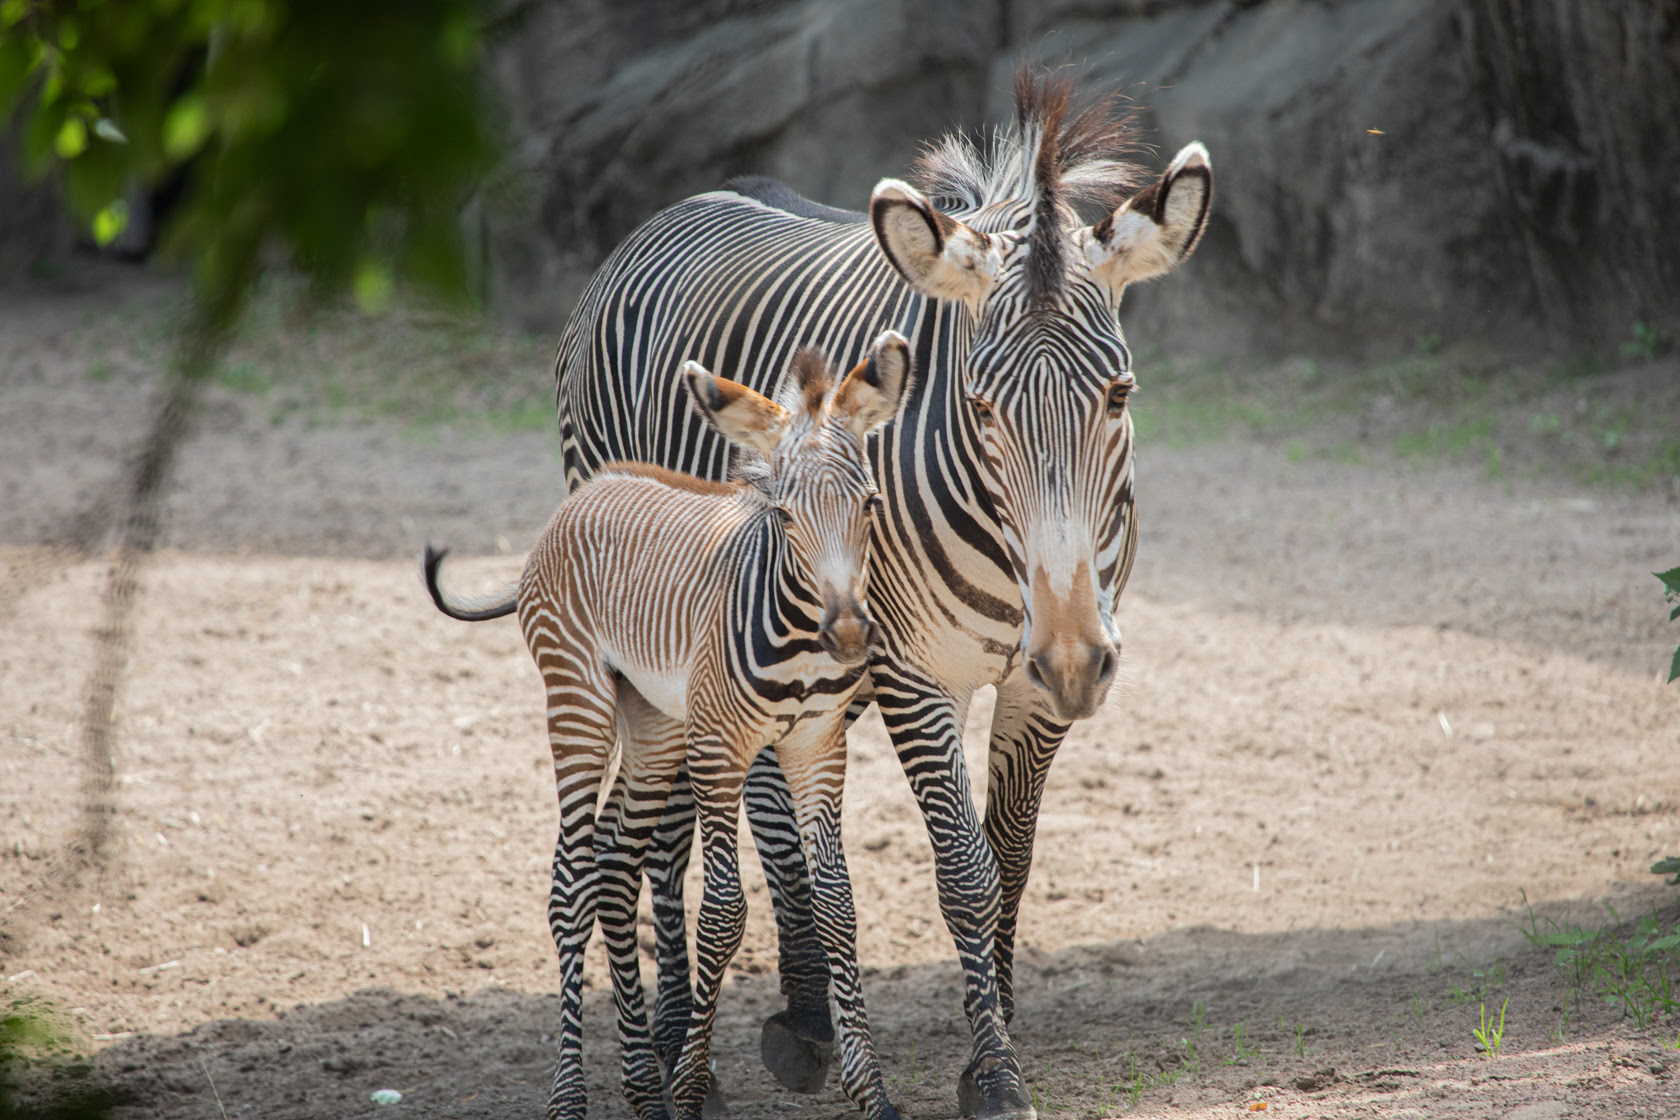 There's An Adorable New Baby Zebra At Lincoln Park Zoo